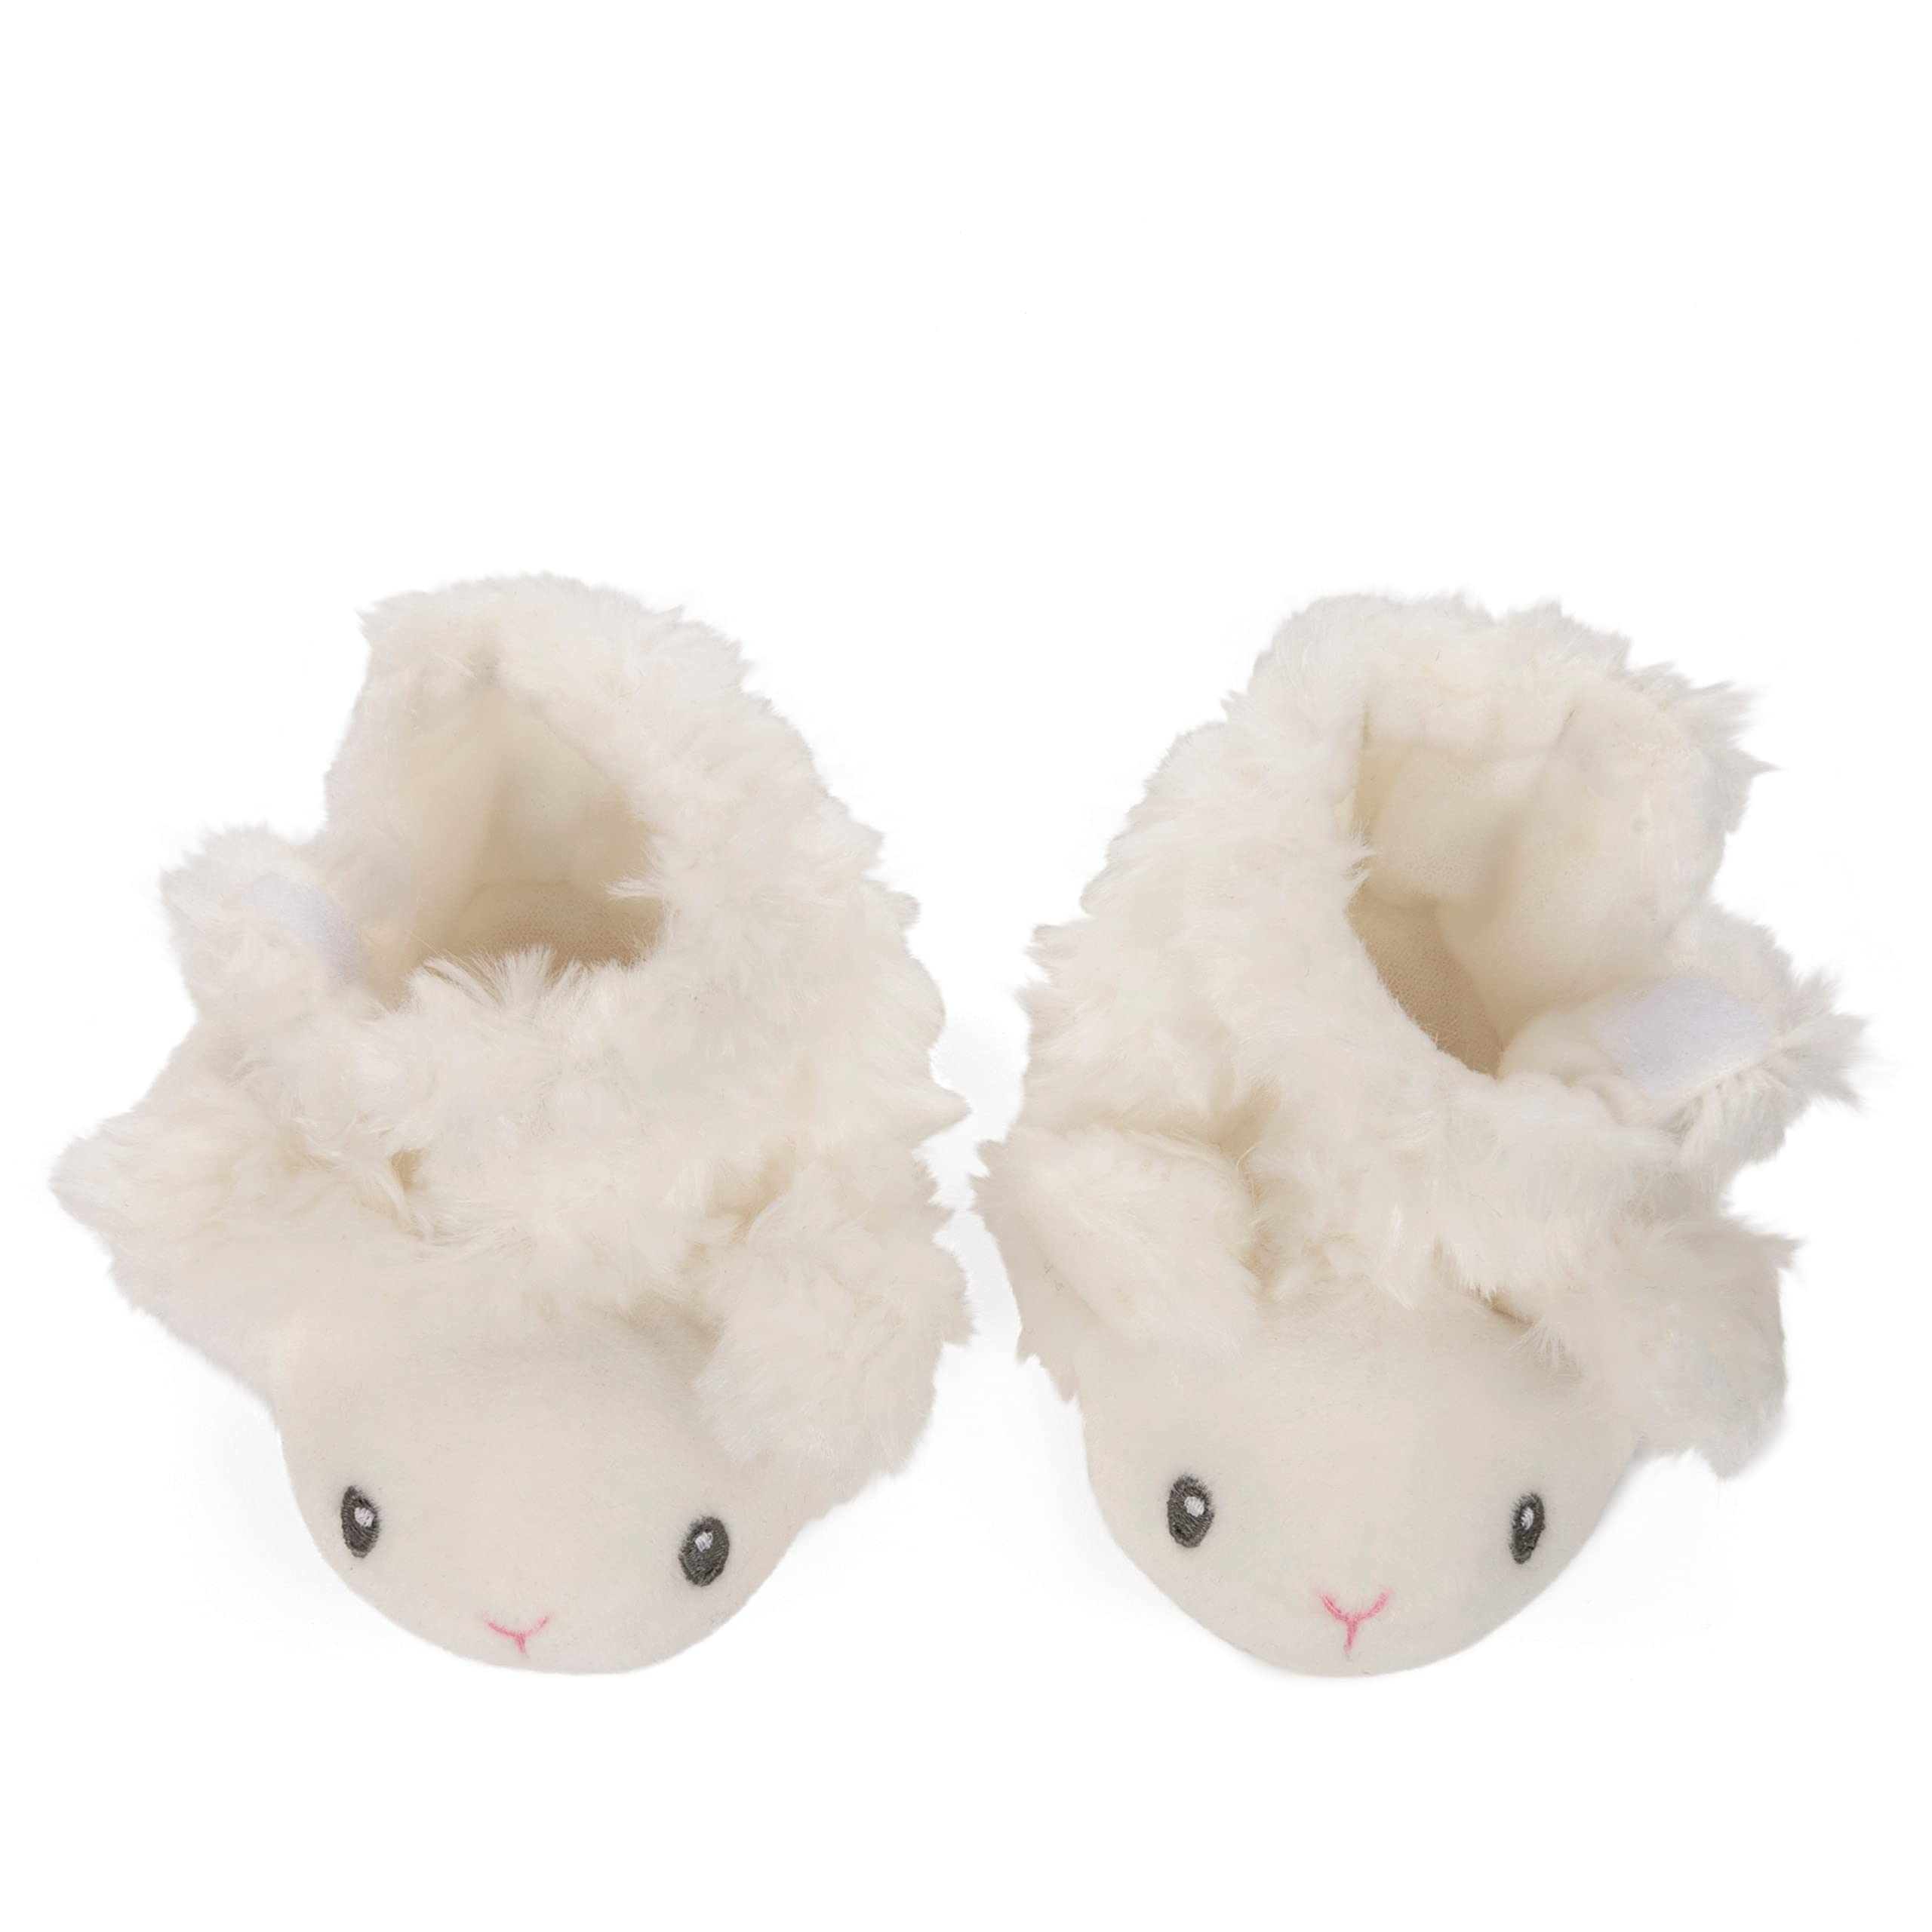 Baby GUND Lena Lamb Soft Baby Booties with Rattle, Baby & Infant Shoes, One Size Fits 0-3 Months